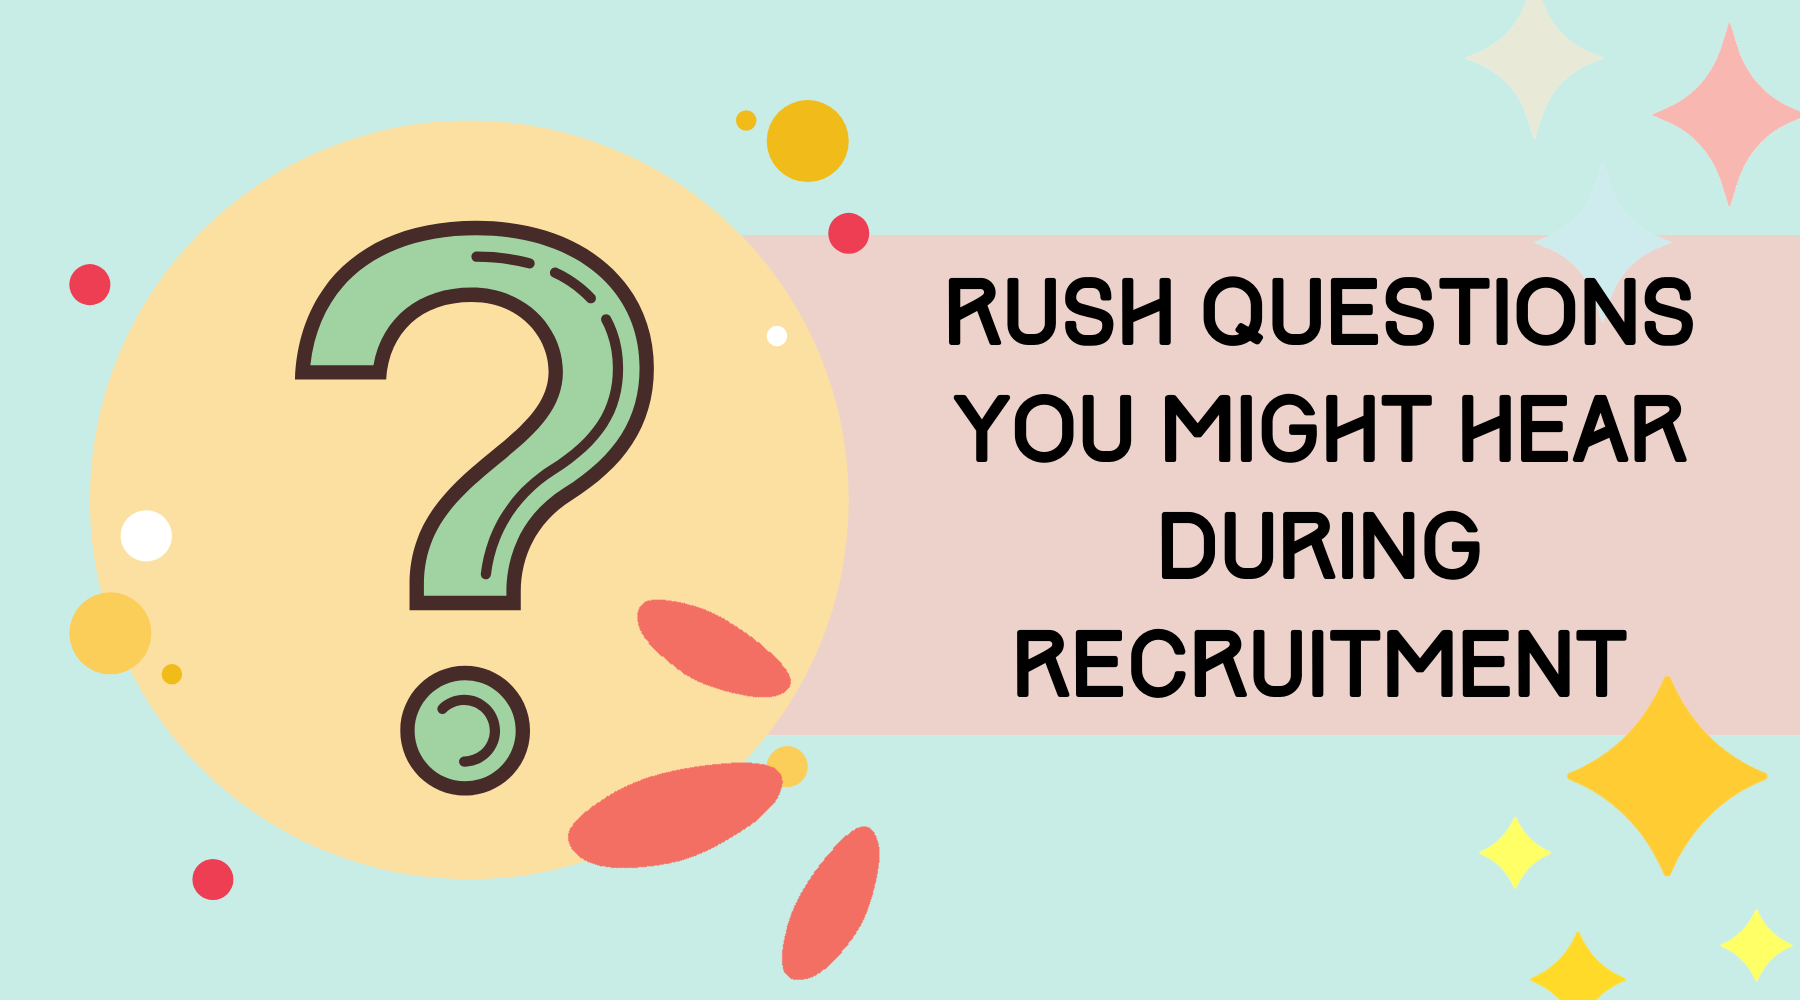 Rush Questions You Might Hear During Recruitment